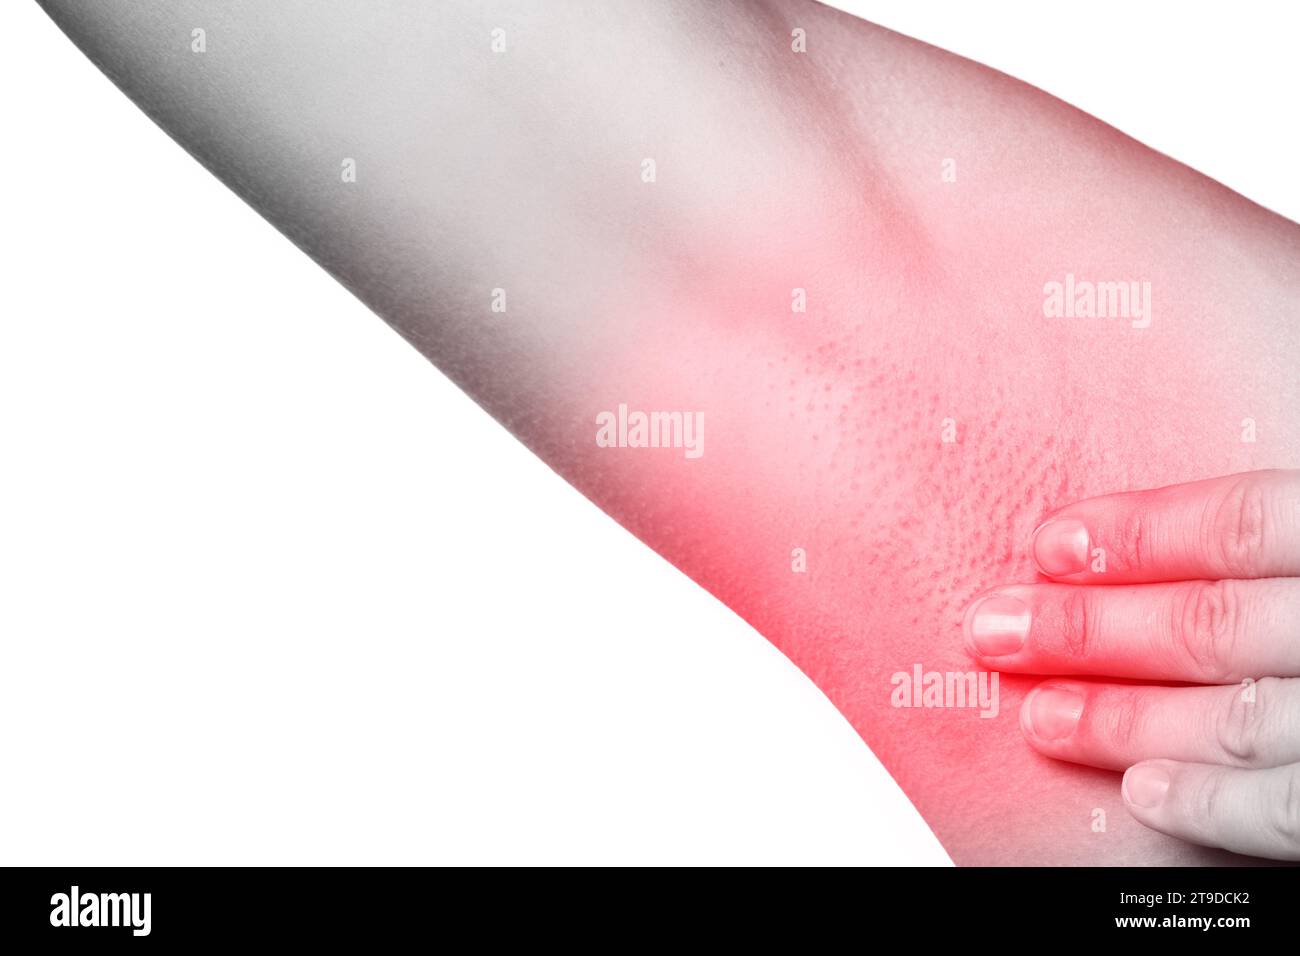 Closeup Of Female Armpit With Redness Skin Irritation Or Swollen Lymph